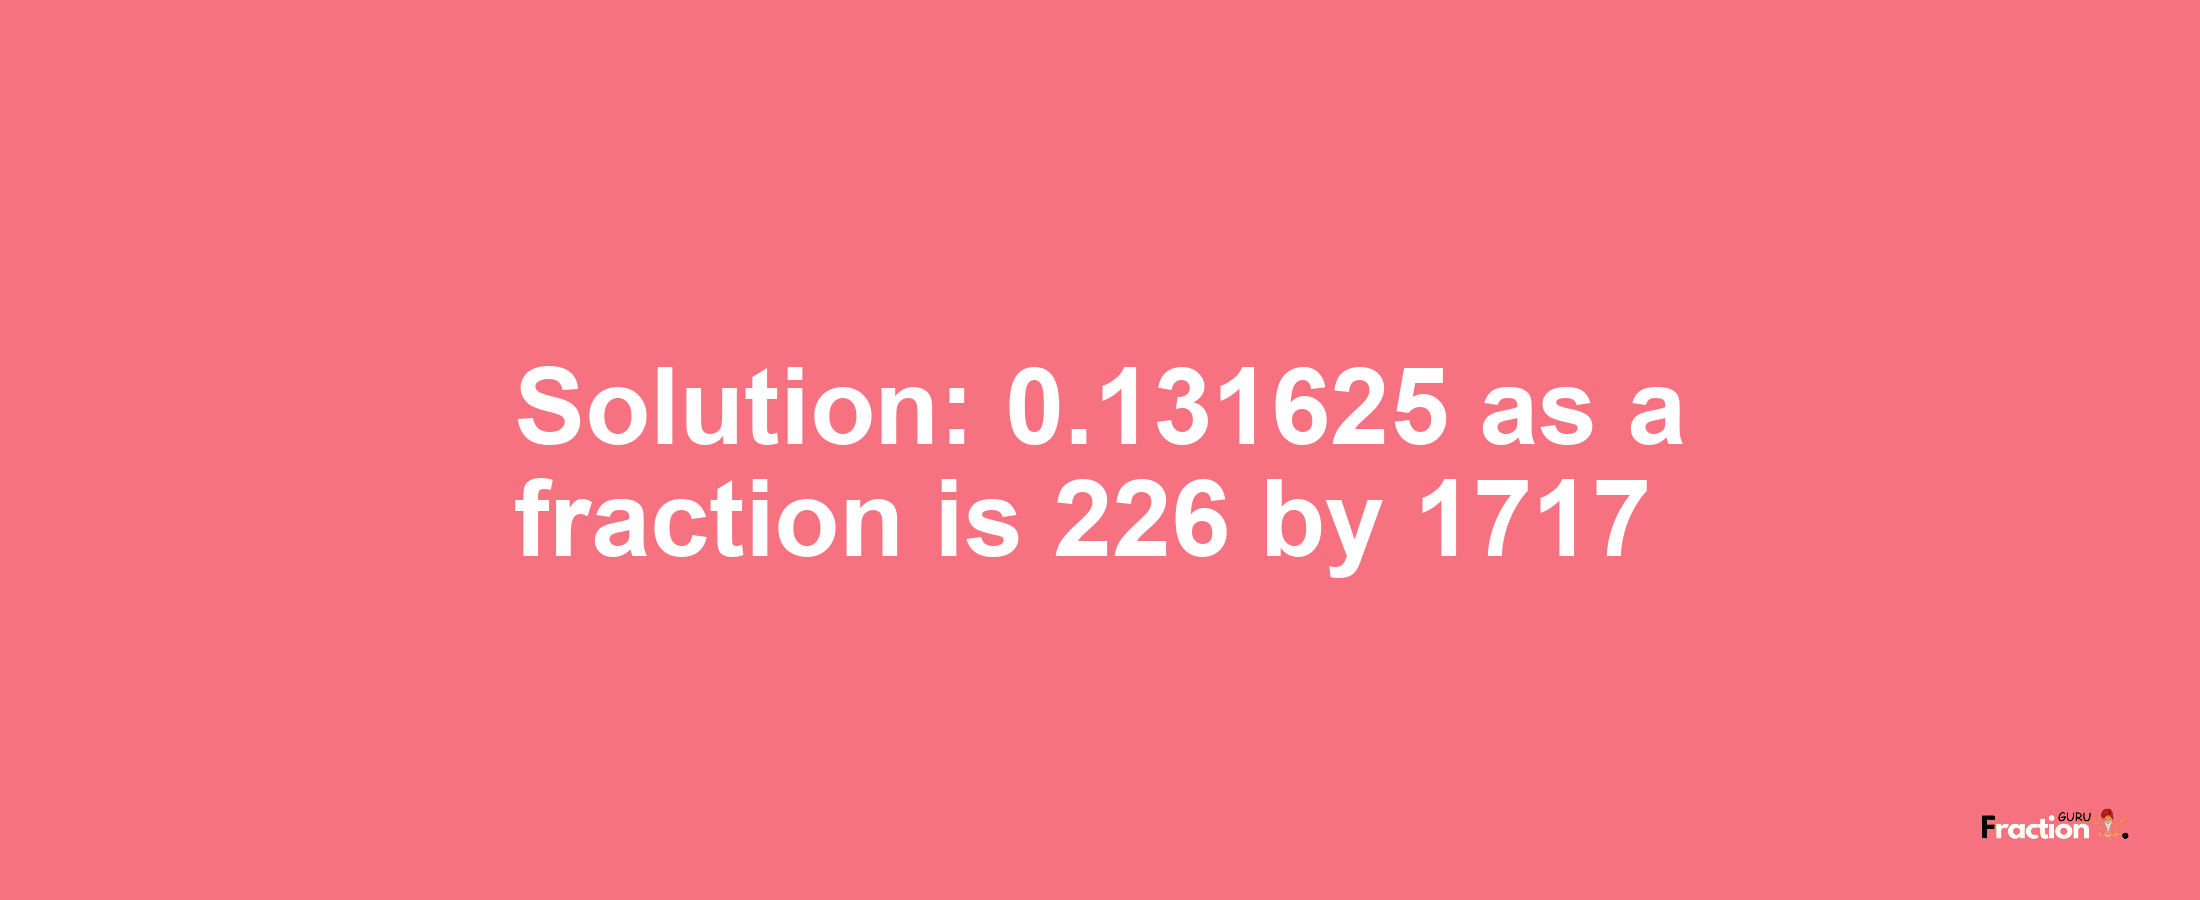 Solution:0.131625 as a fraction is 226/1717